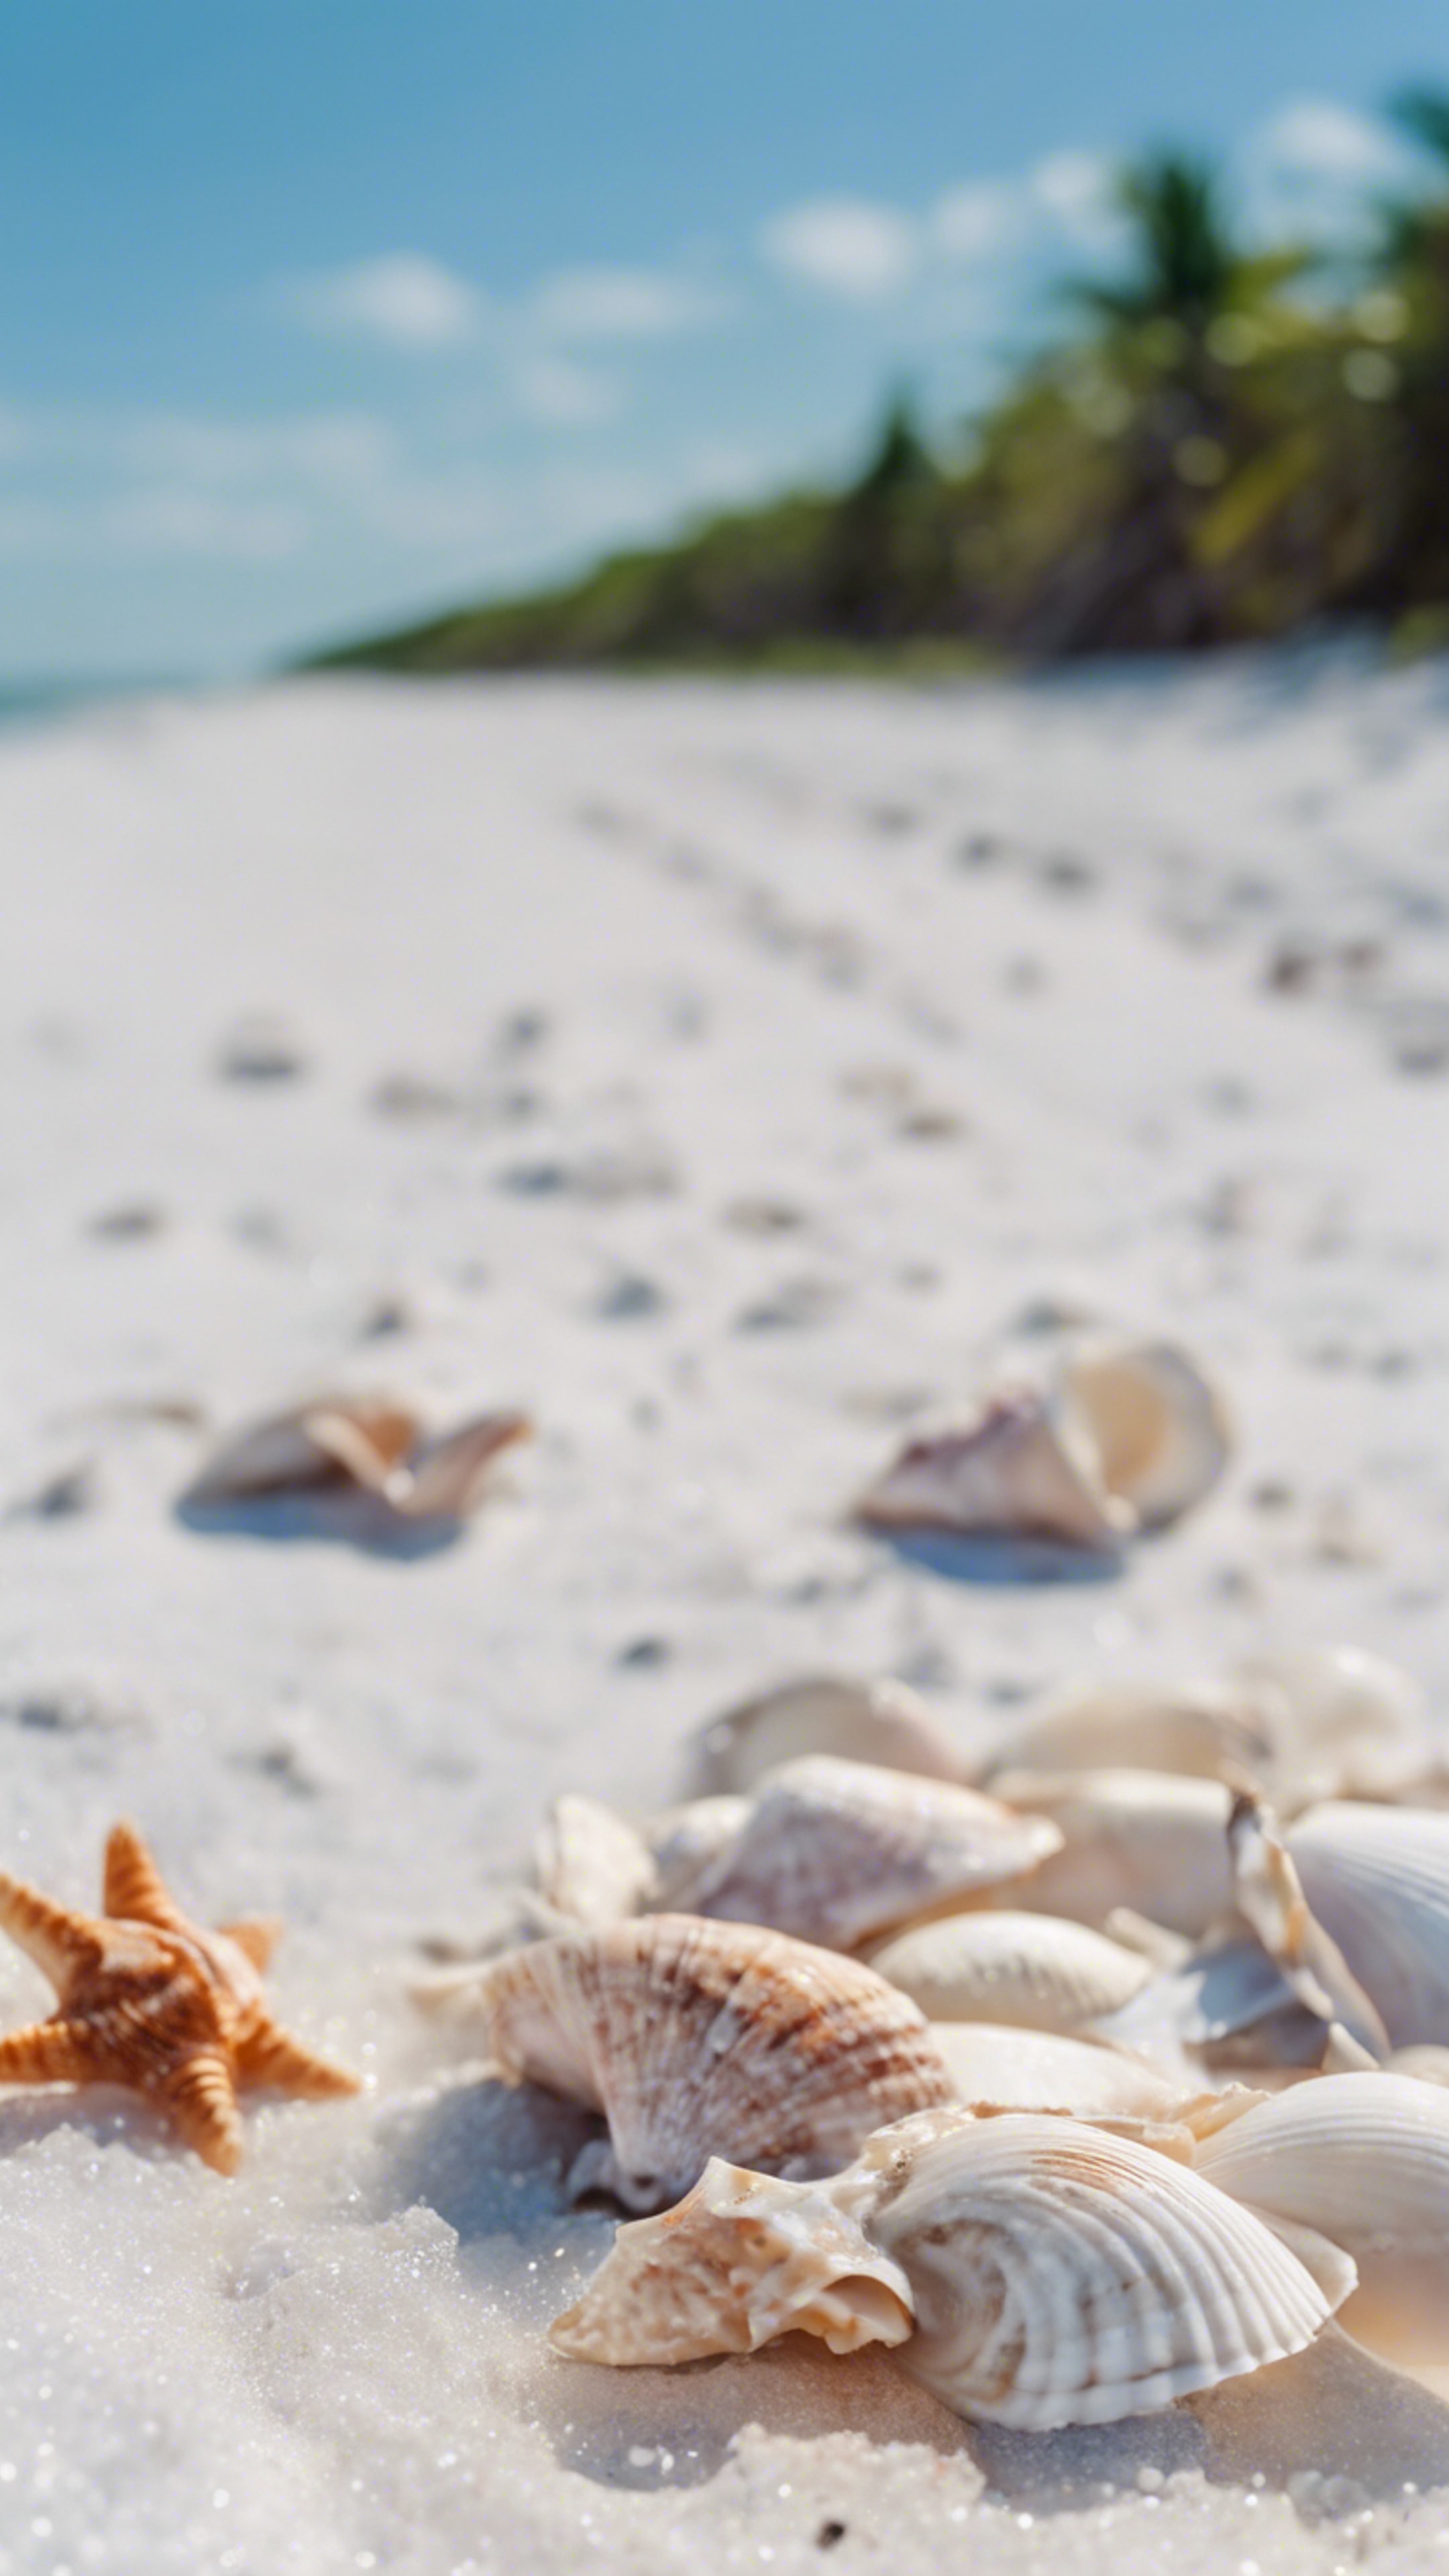 Seashells scattered along the pure white sandy beaches of Sanibel Island under clear, blue skies. Tapet[1c53aef66a12437c830d]